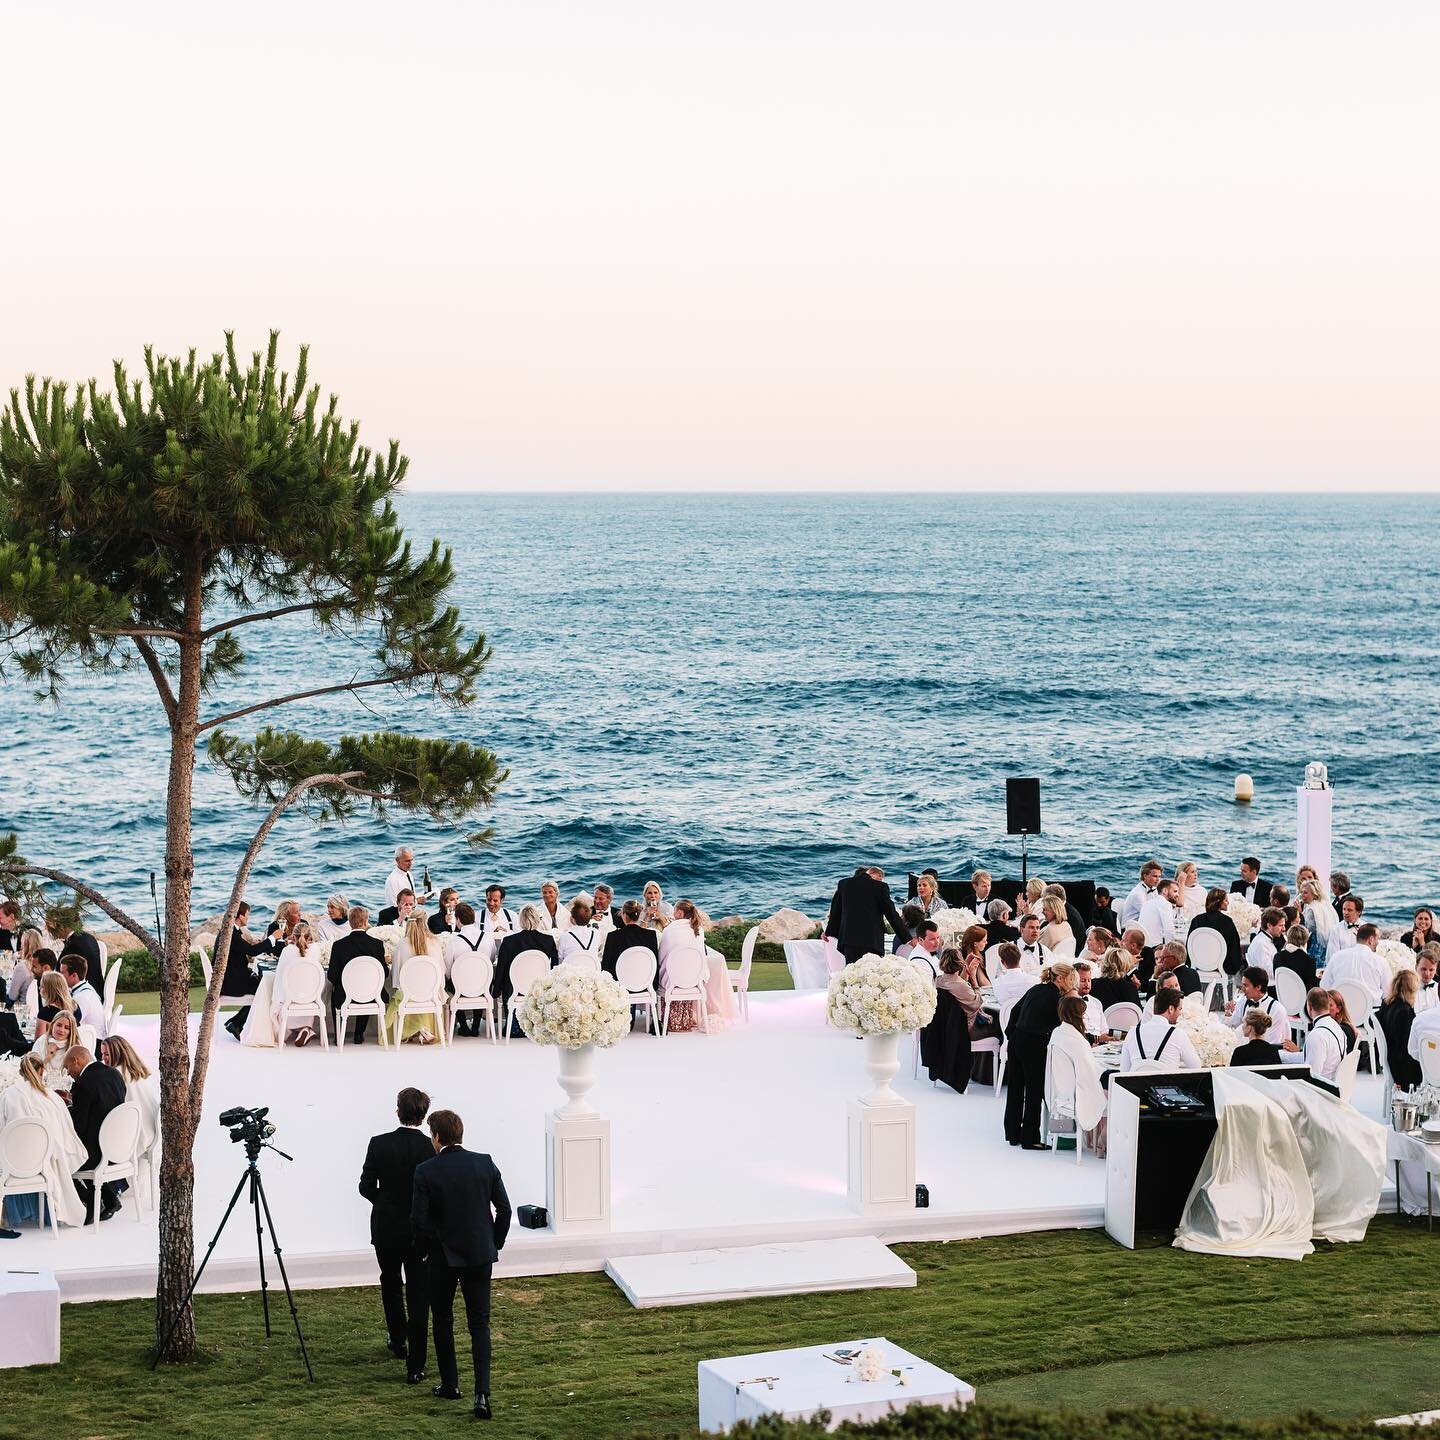 The most perfect wedding destination next to Monaco on the French Riviera🌊🕊

Location: Venue Cap De Vik, Cap d`Ail, France
Thanks to photographer @moment_studio
Gorgeous flower by @mariellaaprosio 
Wedding planner and designer: GLENNE Luxury Weddin